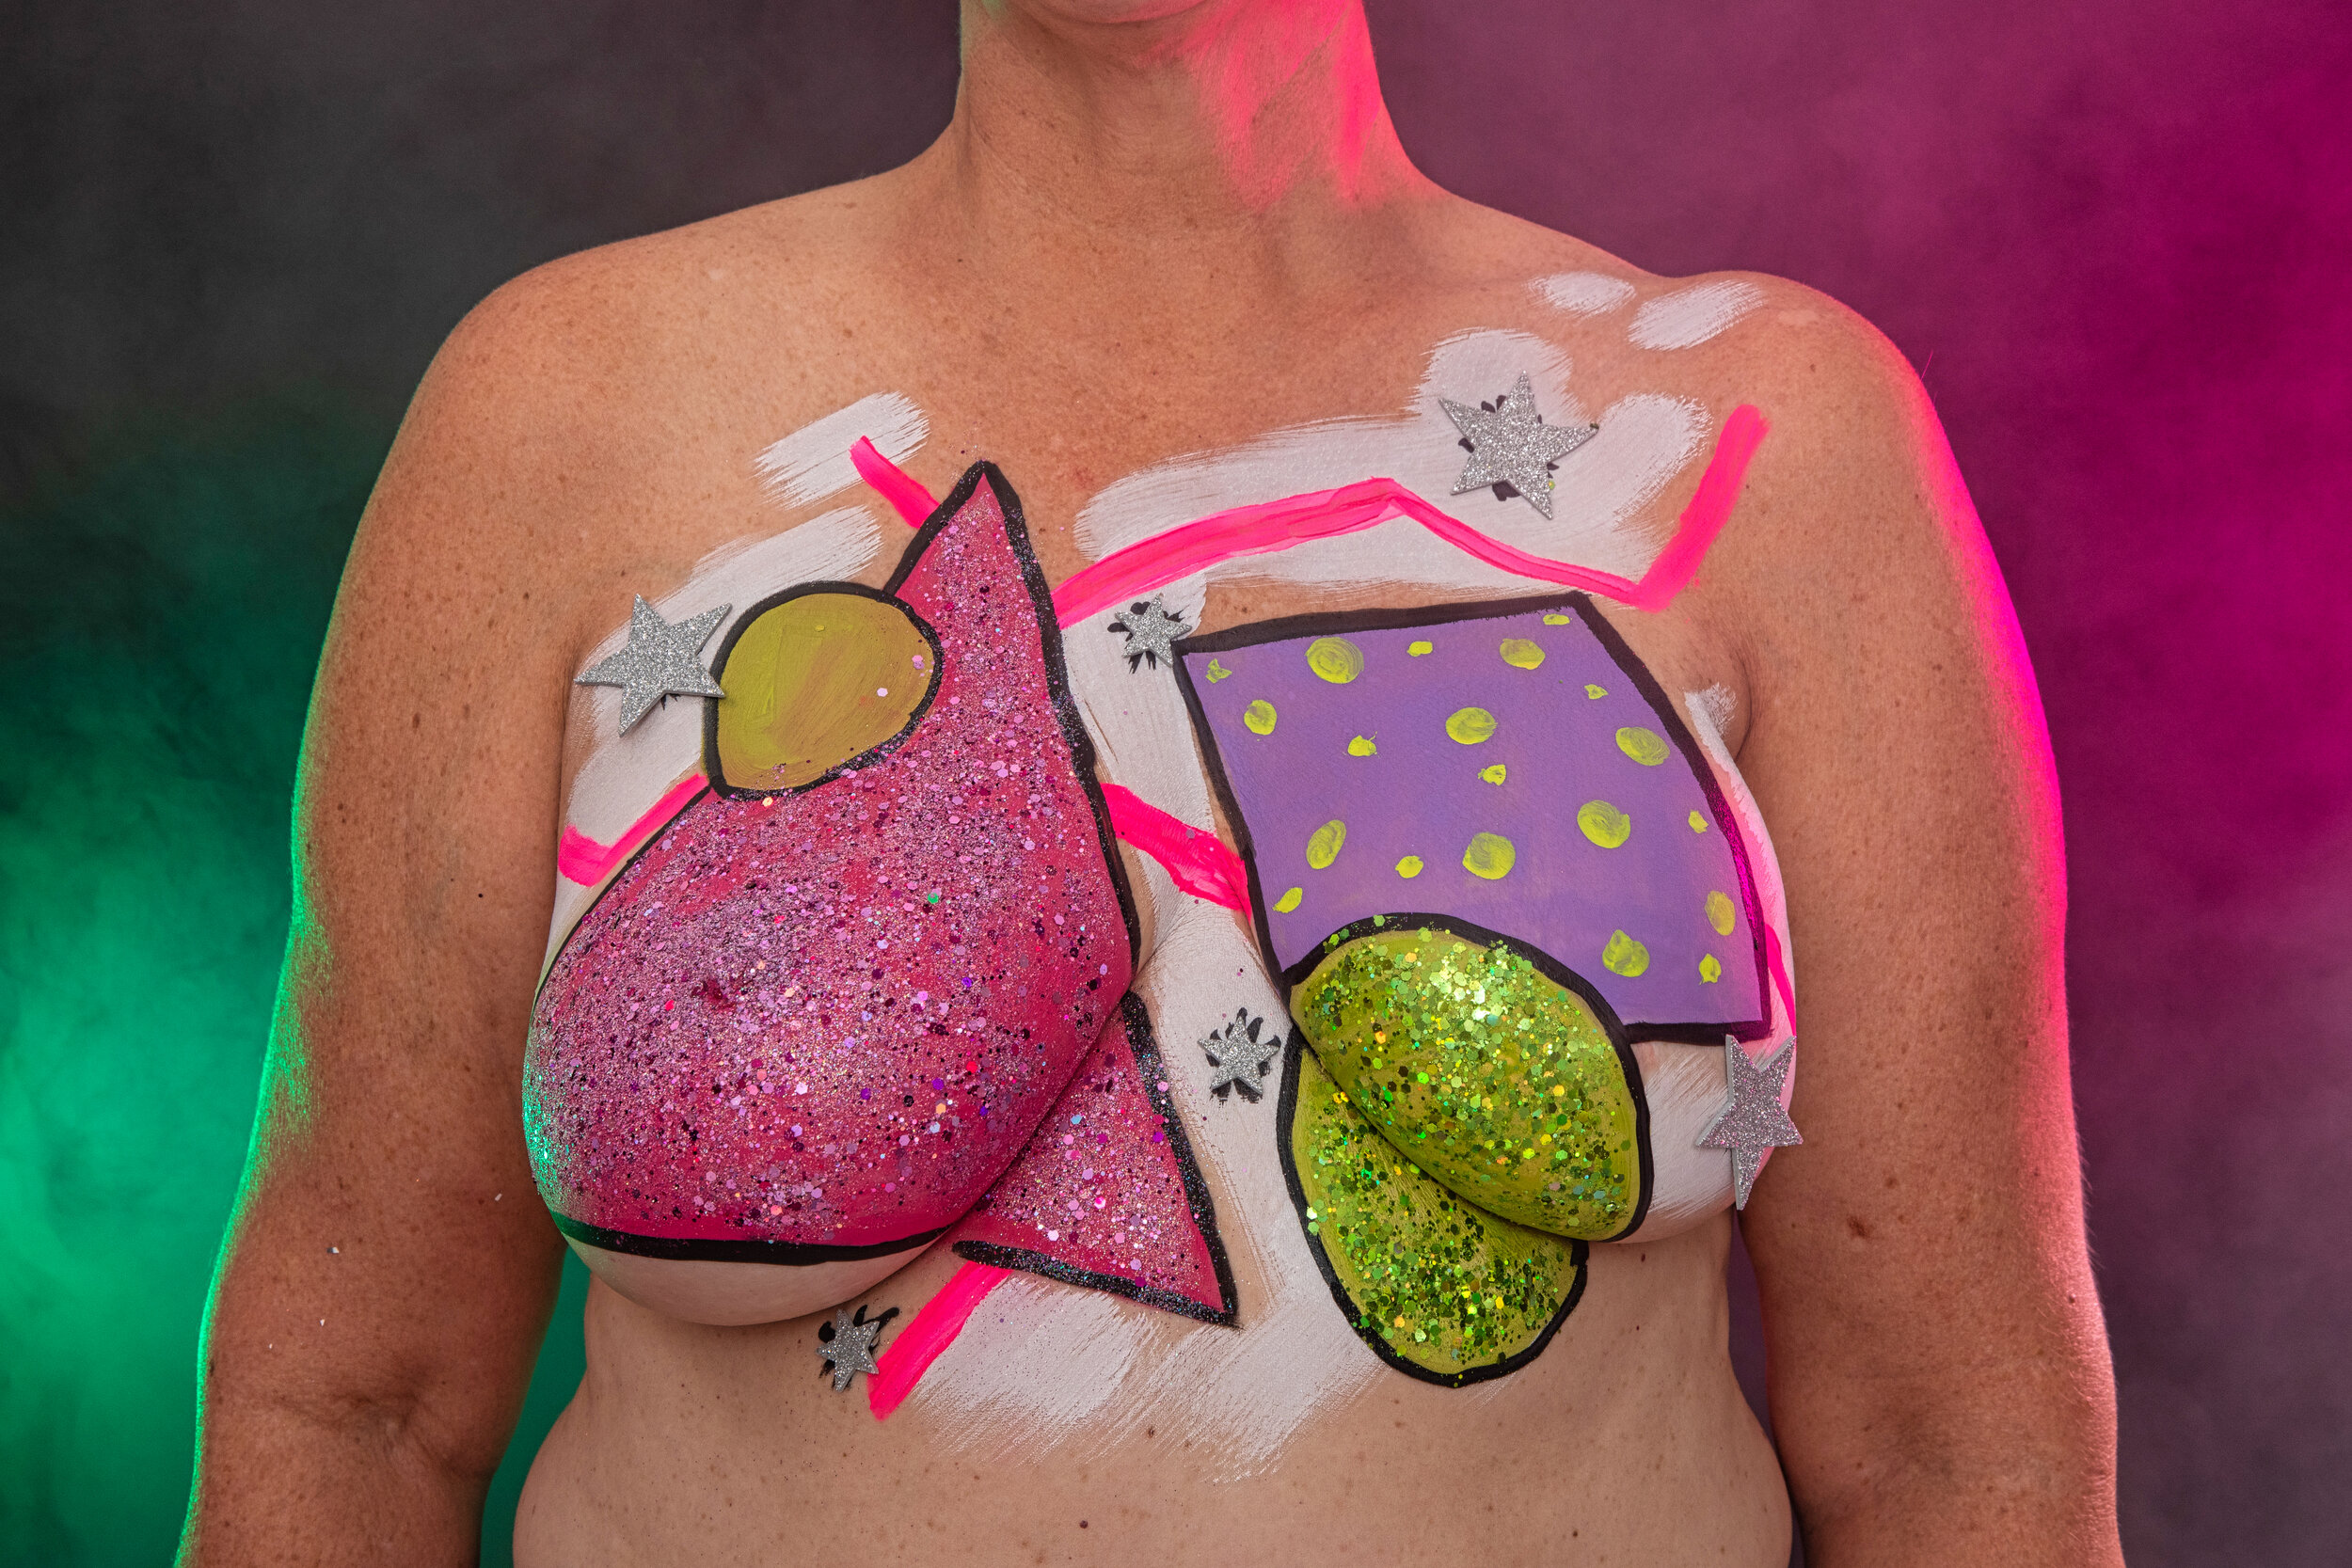 belinda orange recommends boobs painted like easter eggs pic